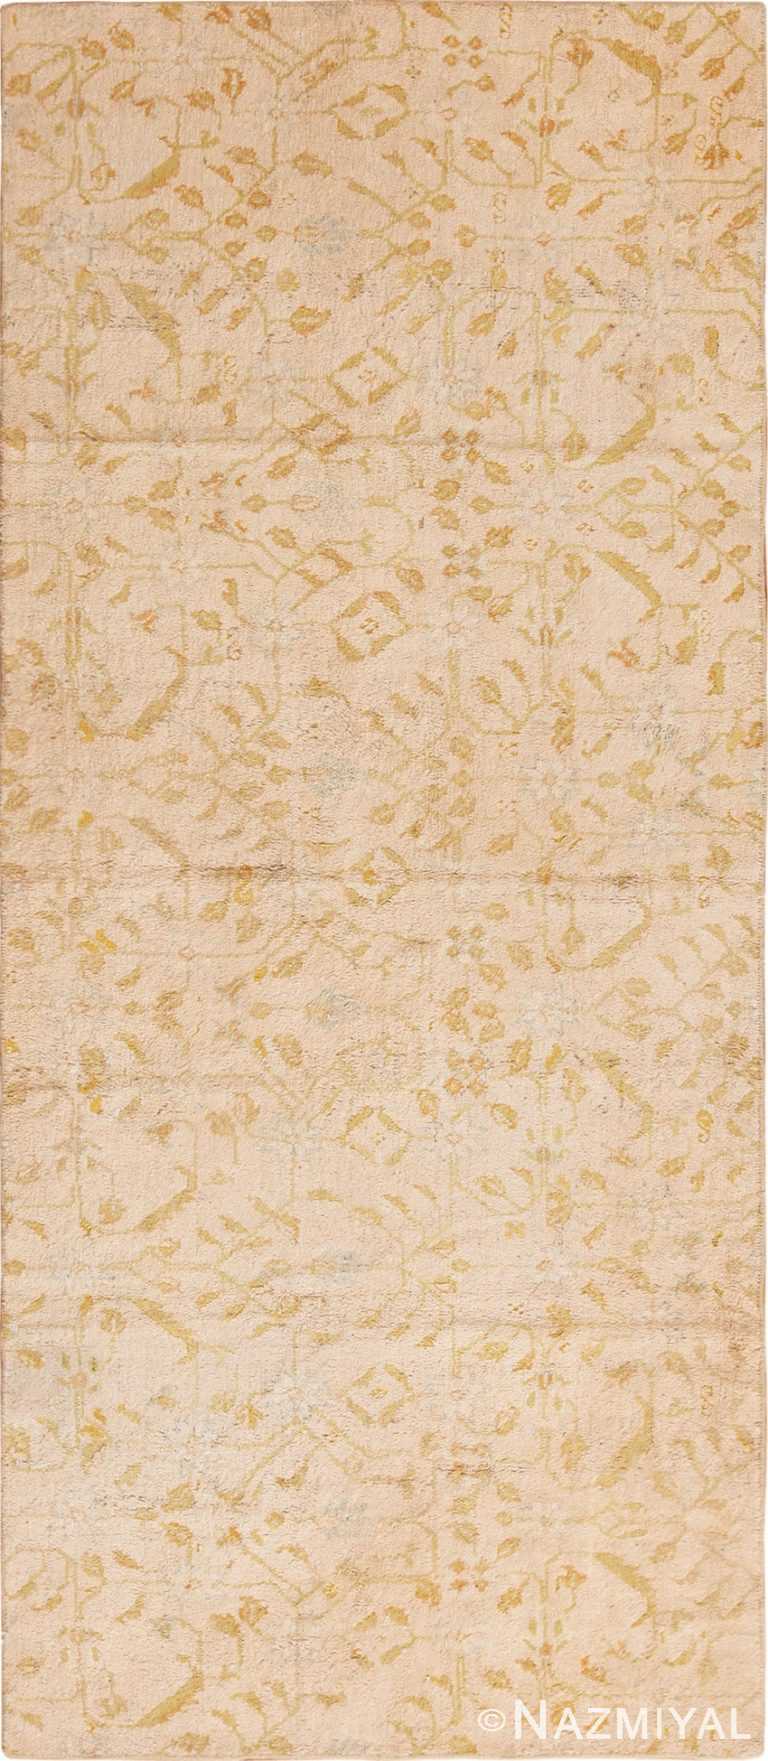 Full Antique Indian cotton Agra rug 49753 by Nazmiyal